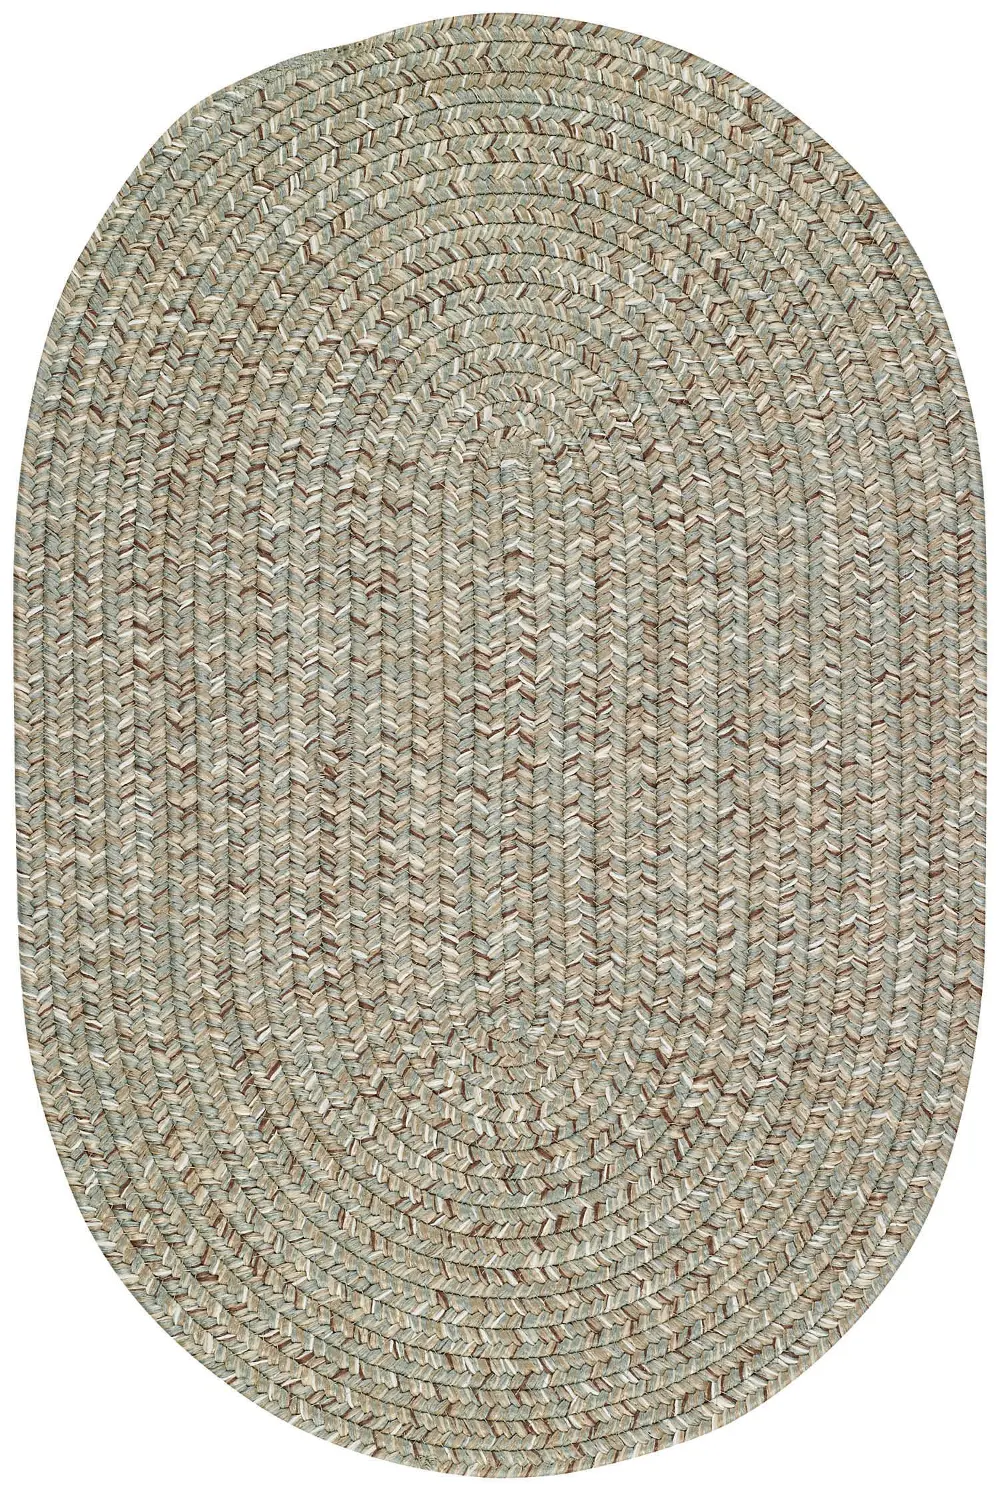 0110VS00200030450 XX-Small Spa Green Oval Braided Indoor-Outdoor Rug - Sea Glass-1